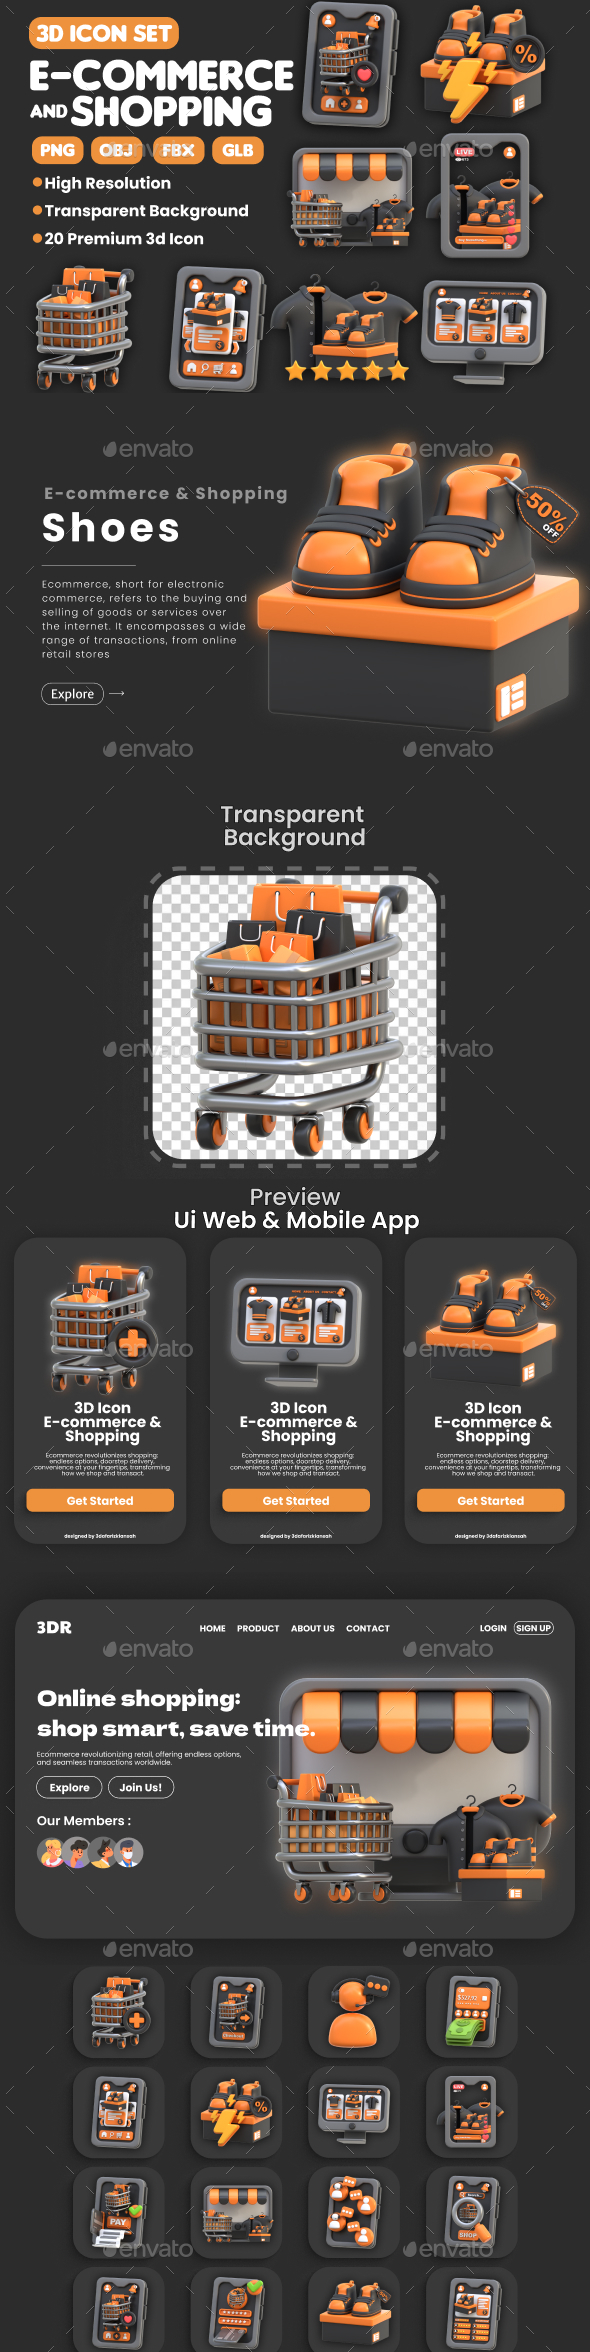 3D E-Commerce and Shopping